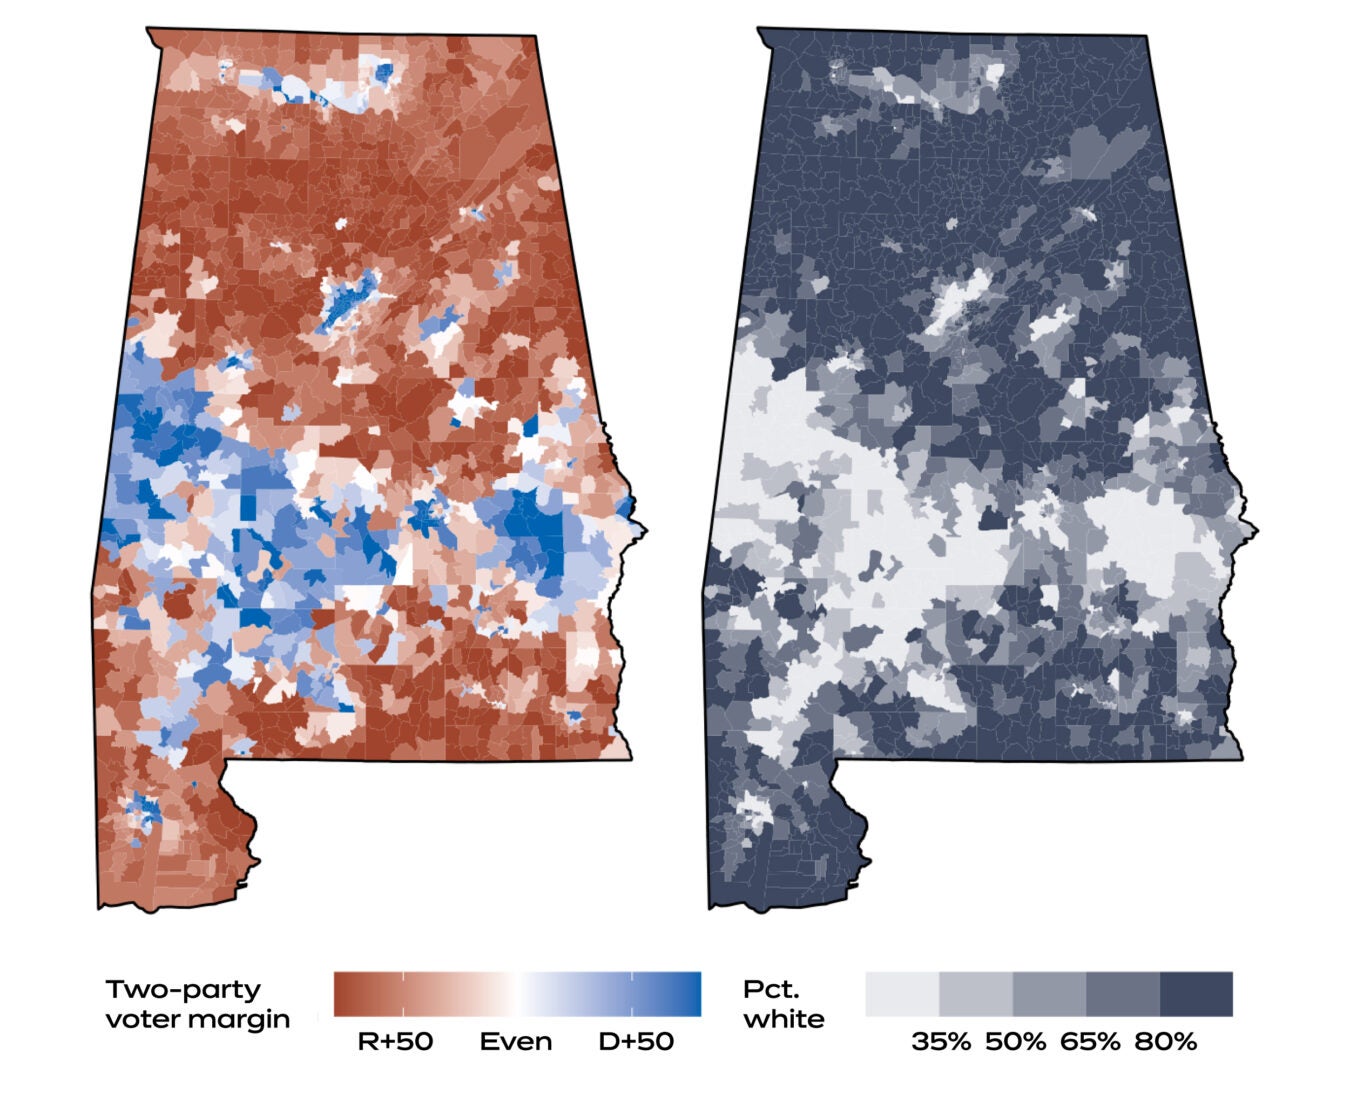 Maps compare partisan lean vs share of minority voters across Alabama.